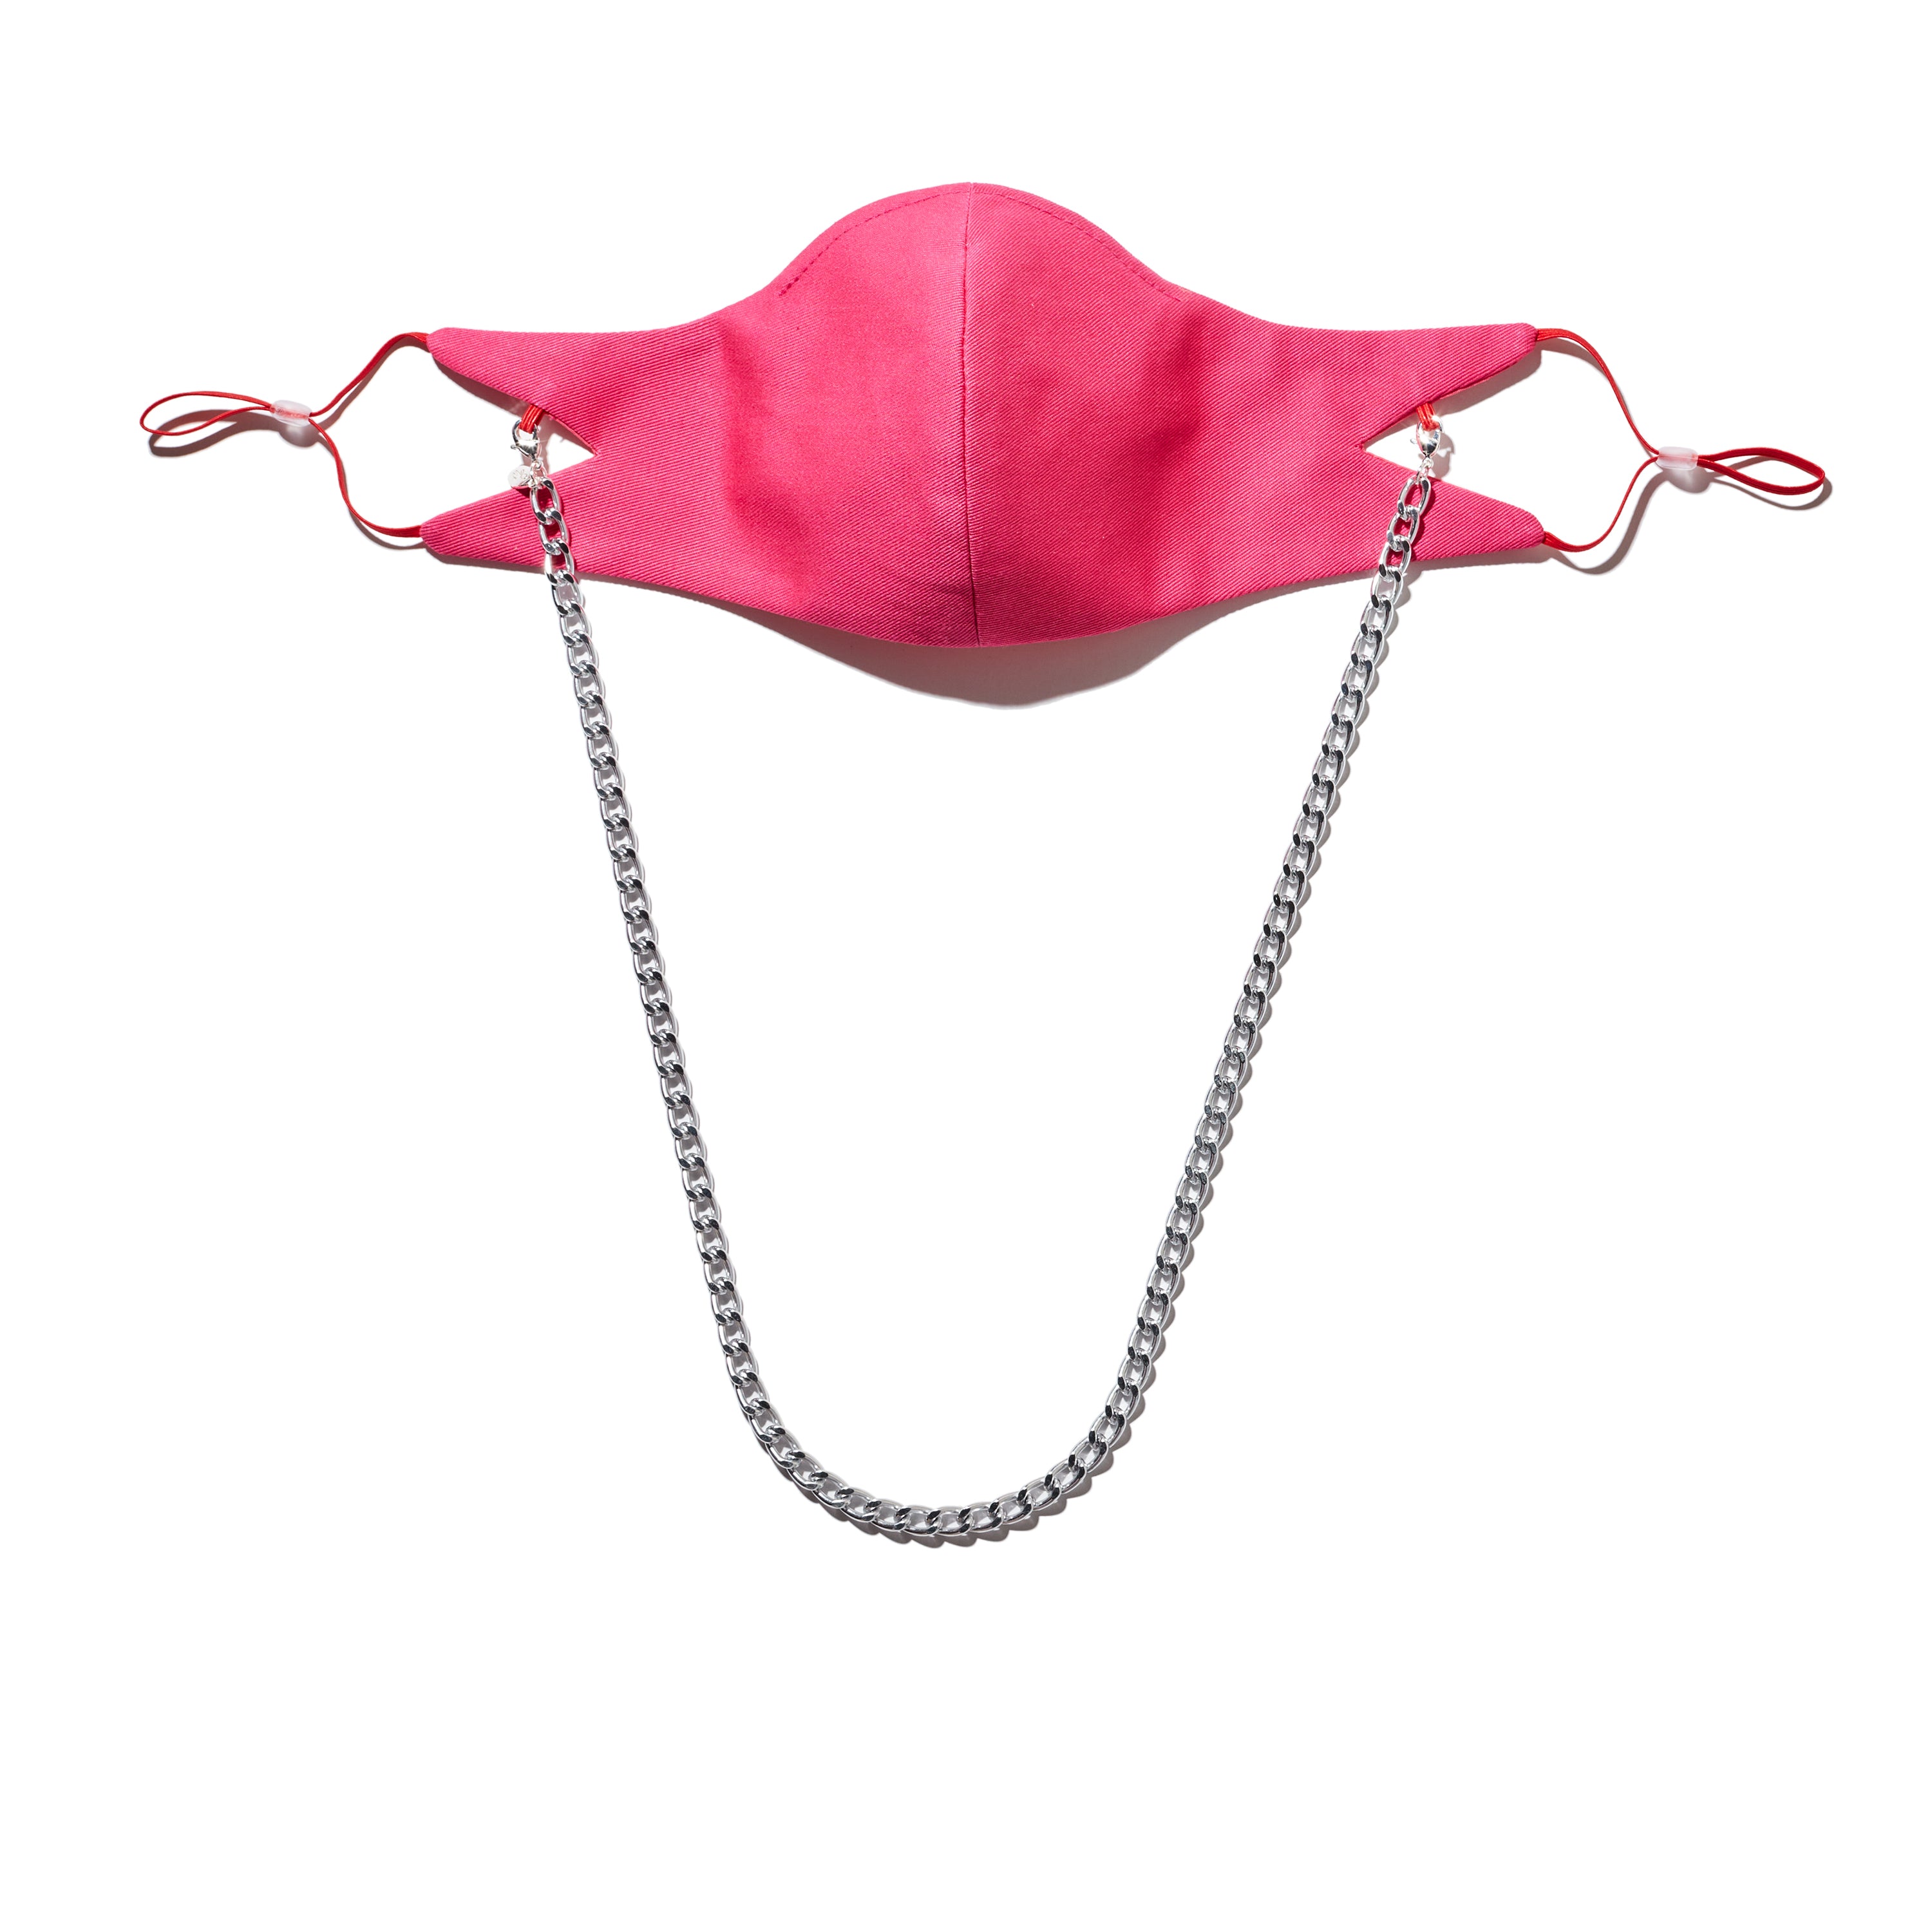 The Tina Cotton Twill in Pink with 7mm Silver chain.